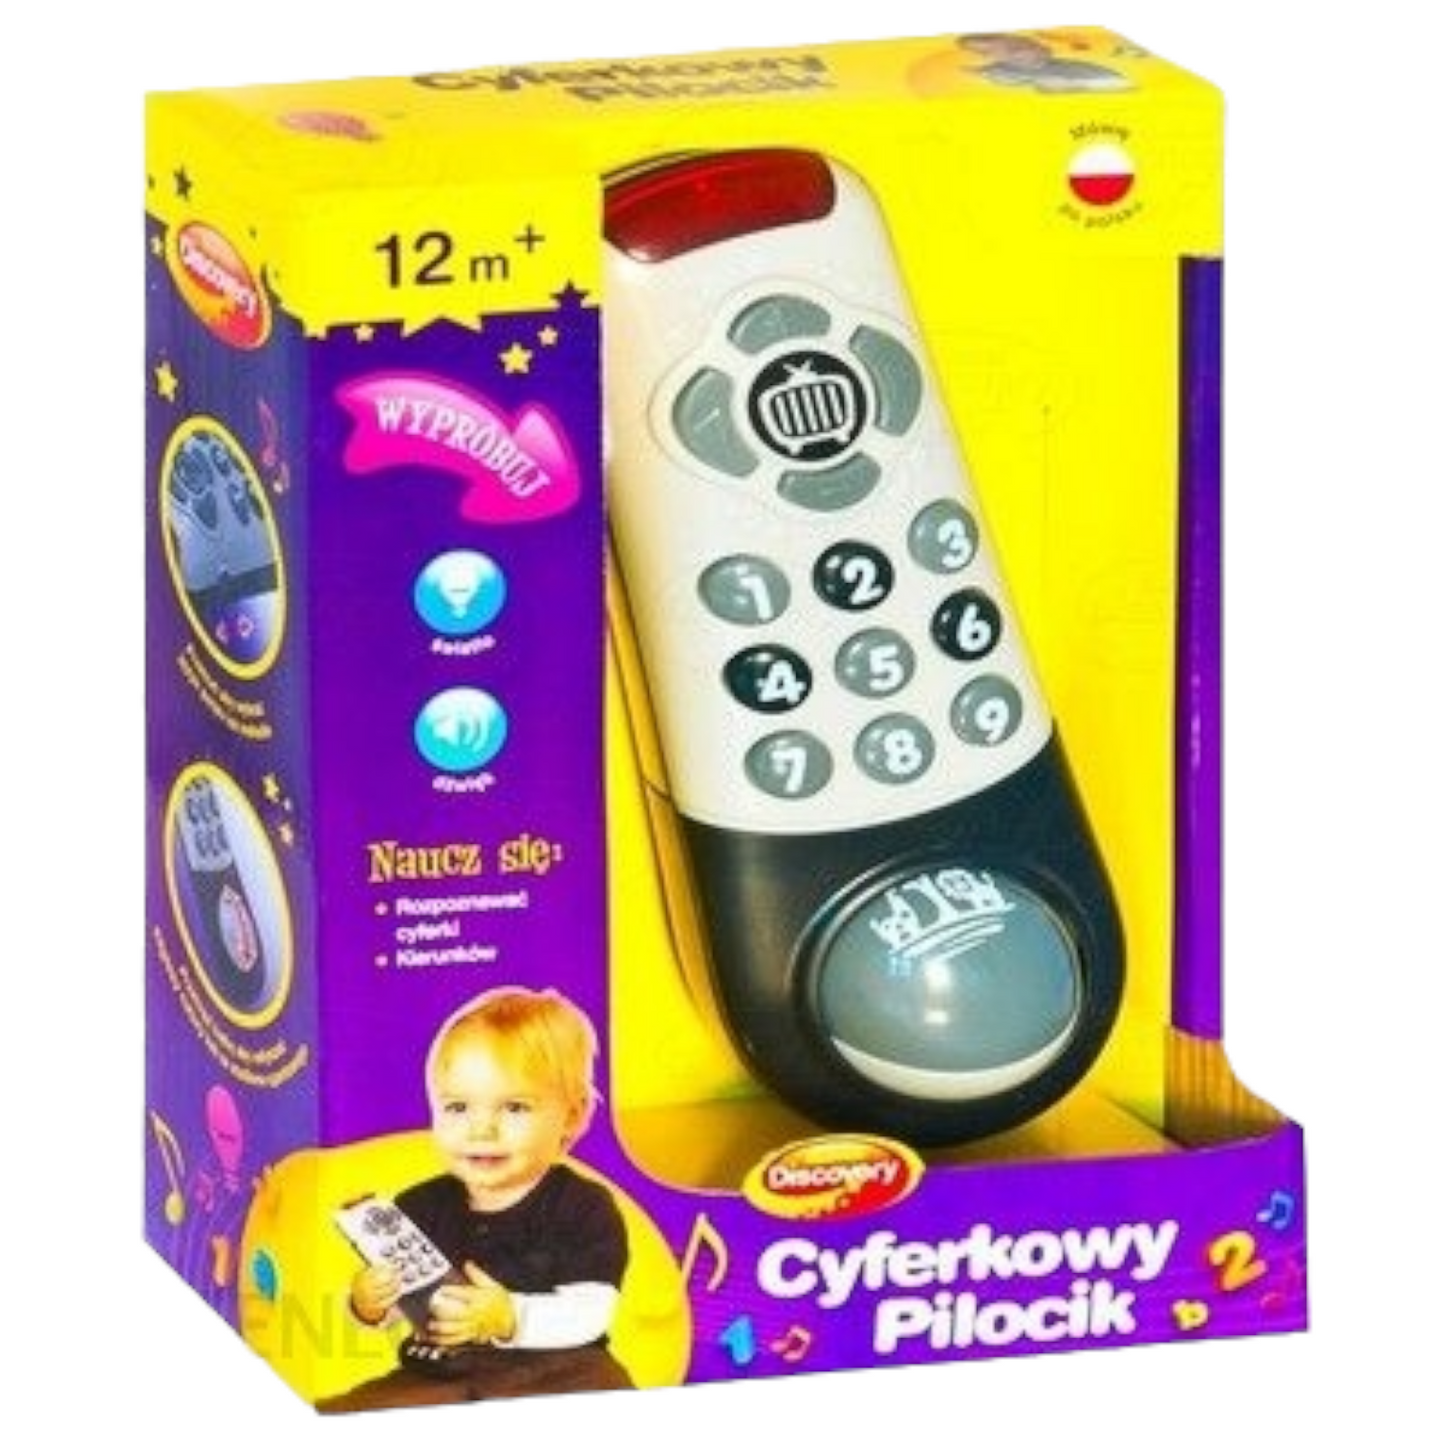 My First TV Remote Musical Toy